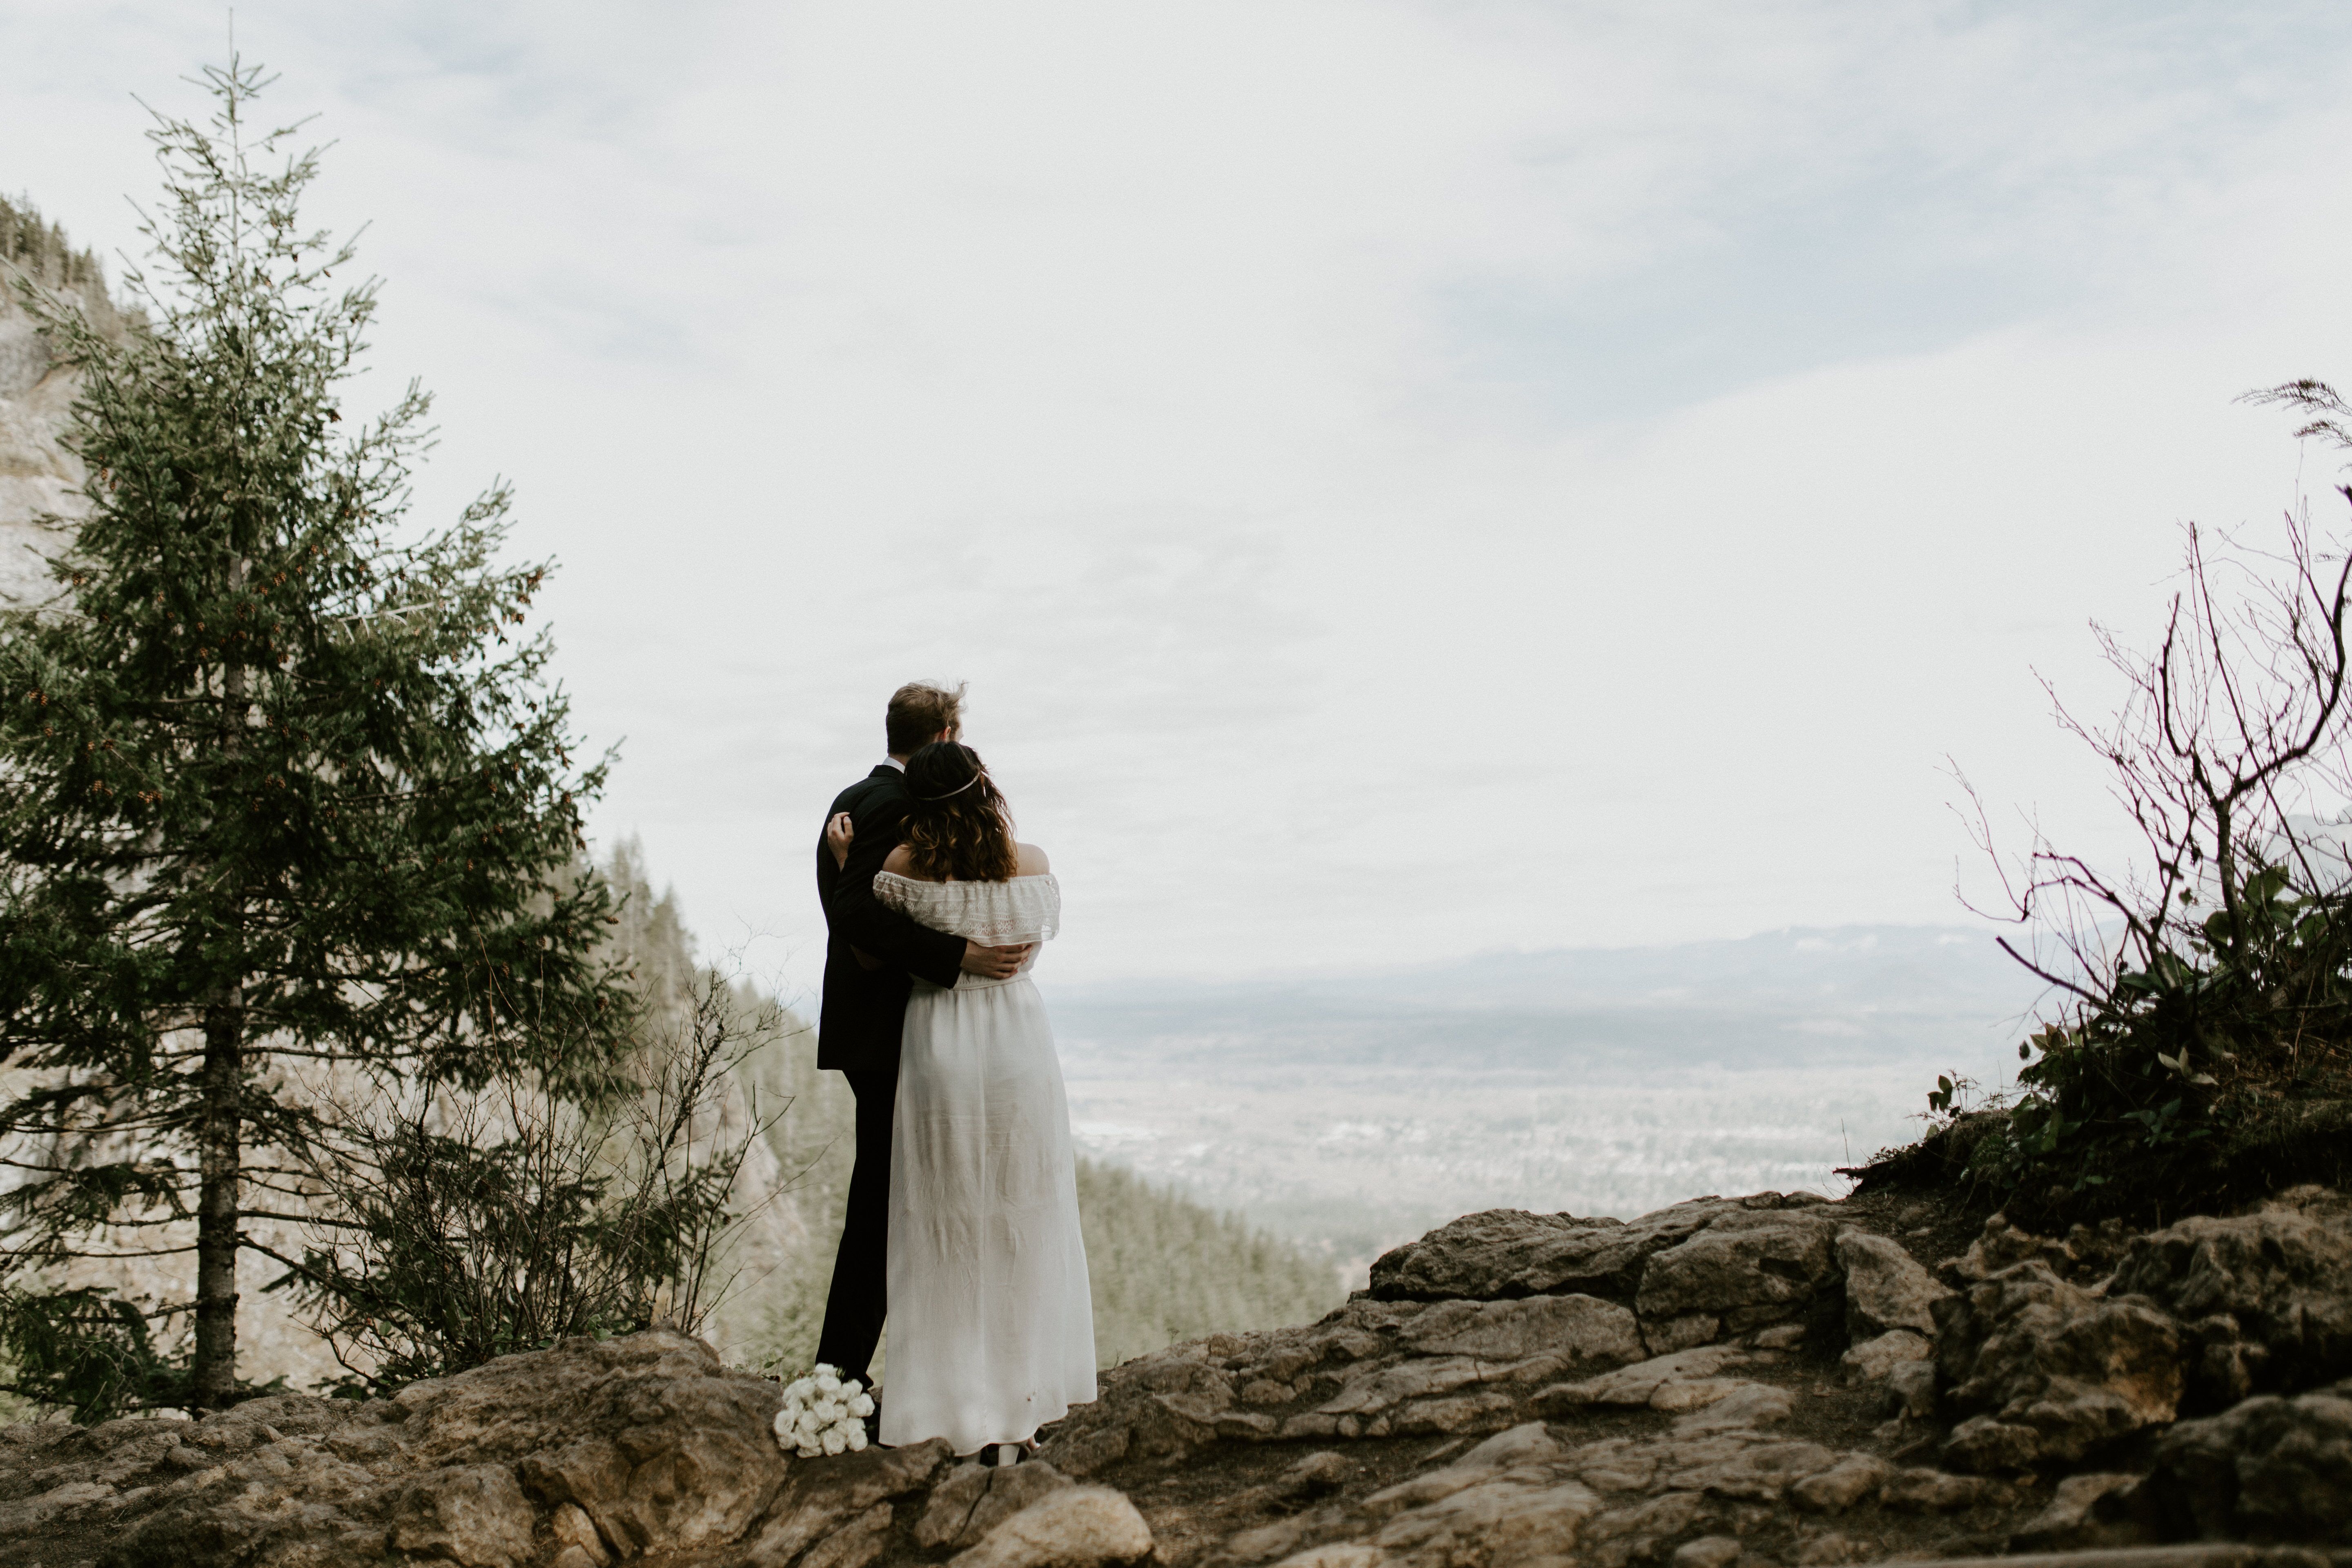 Michael and Winnifred look out on the view of Washington state from the cliff of Rattlesnake Ledge. Elopement adventure shoot at Rattlesnake Ledge, Washington.